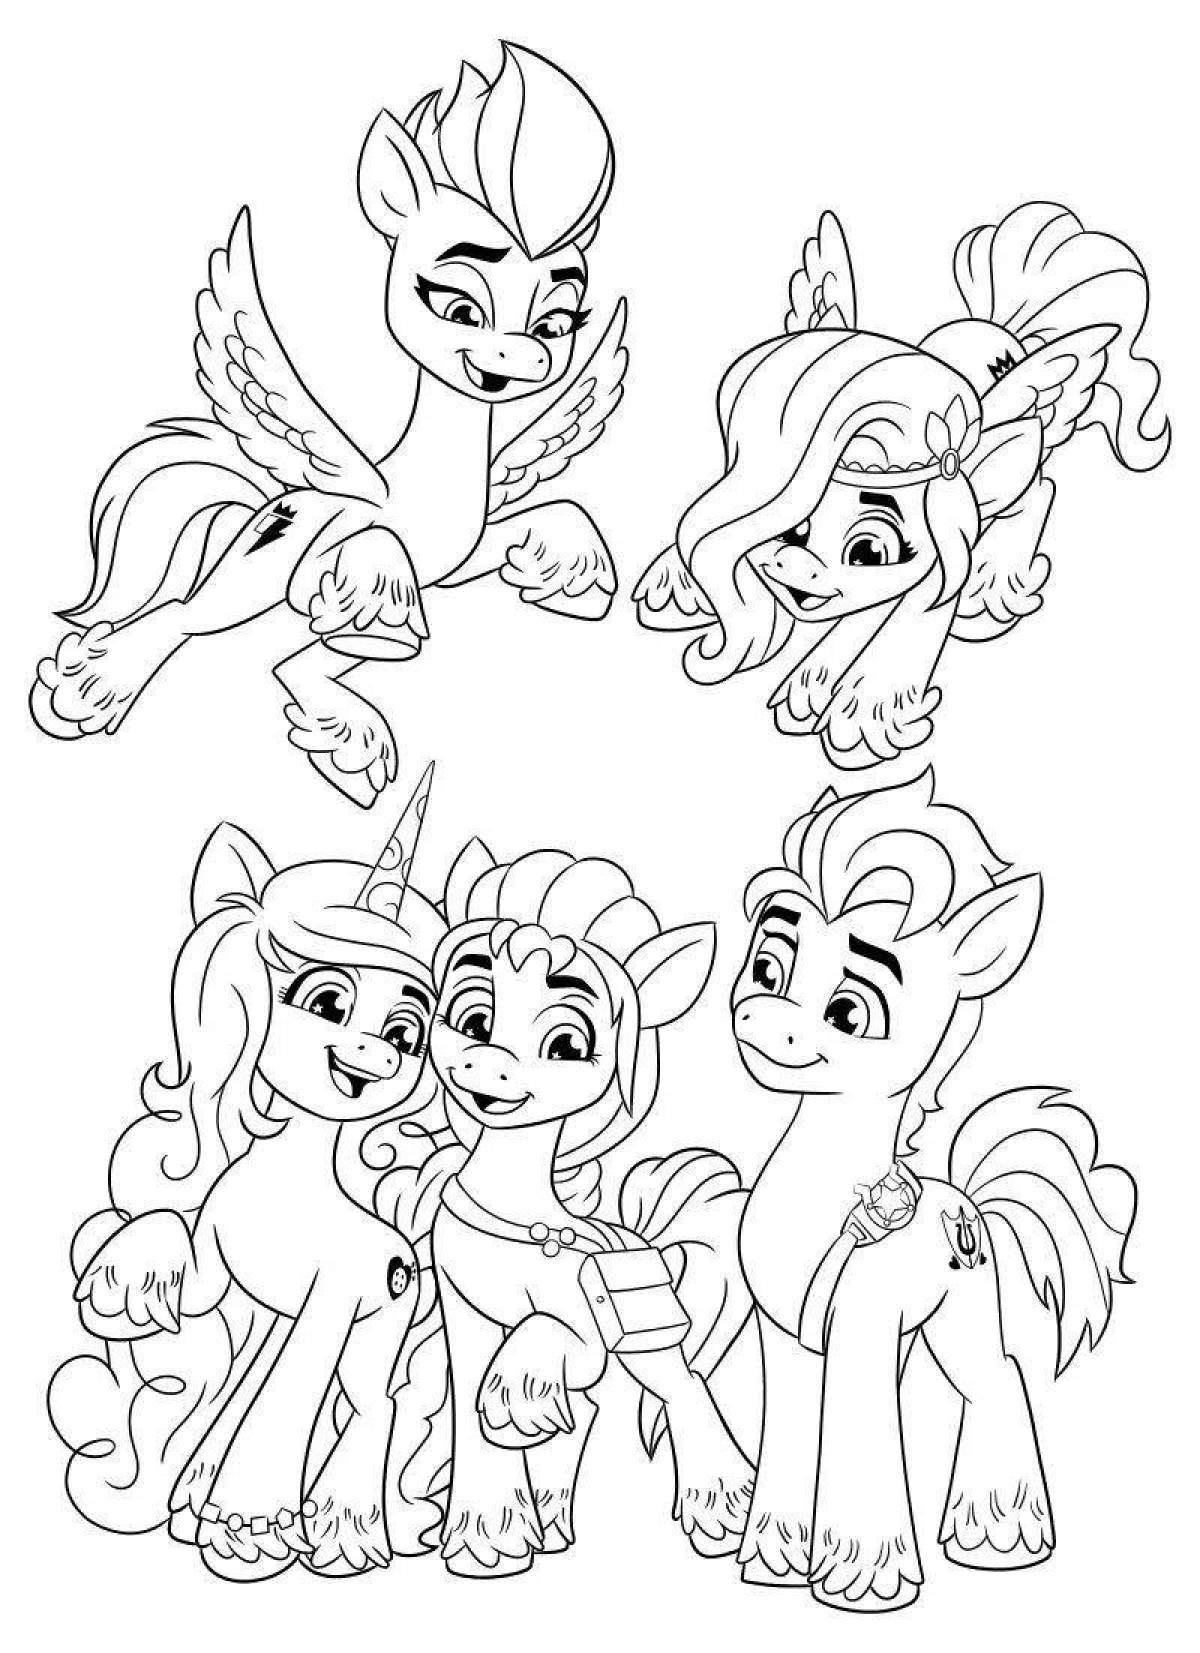 Coloring page nice pony turn on